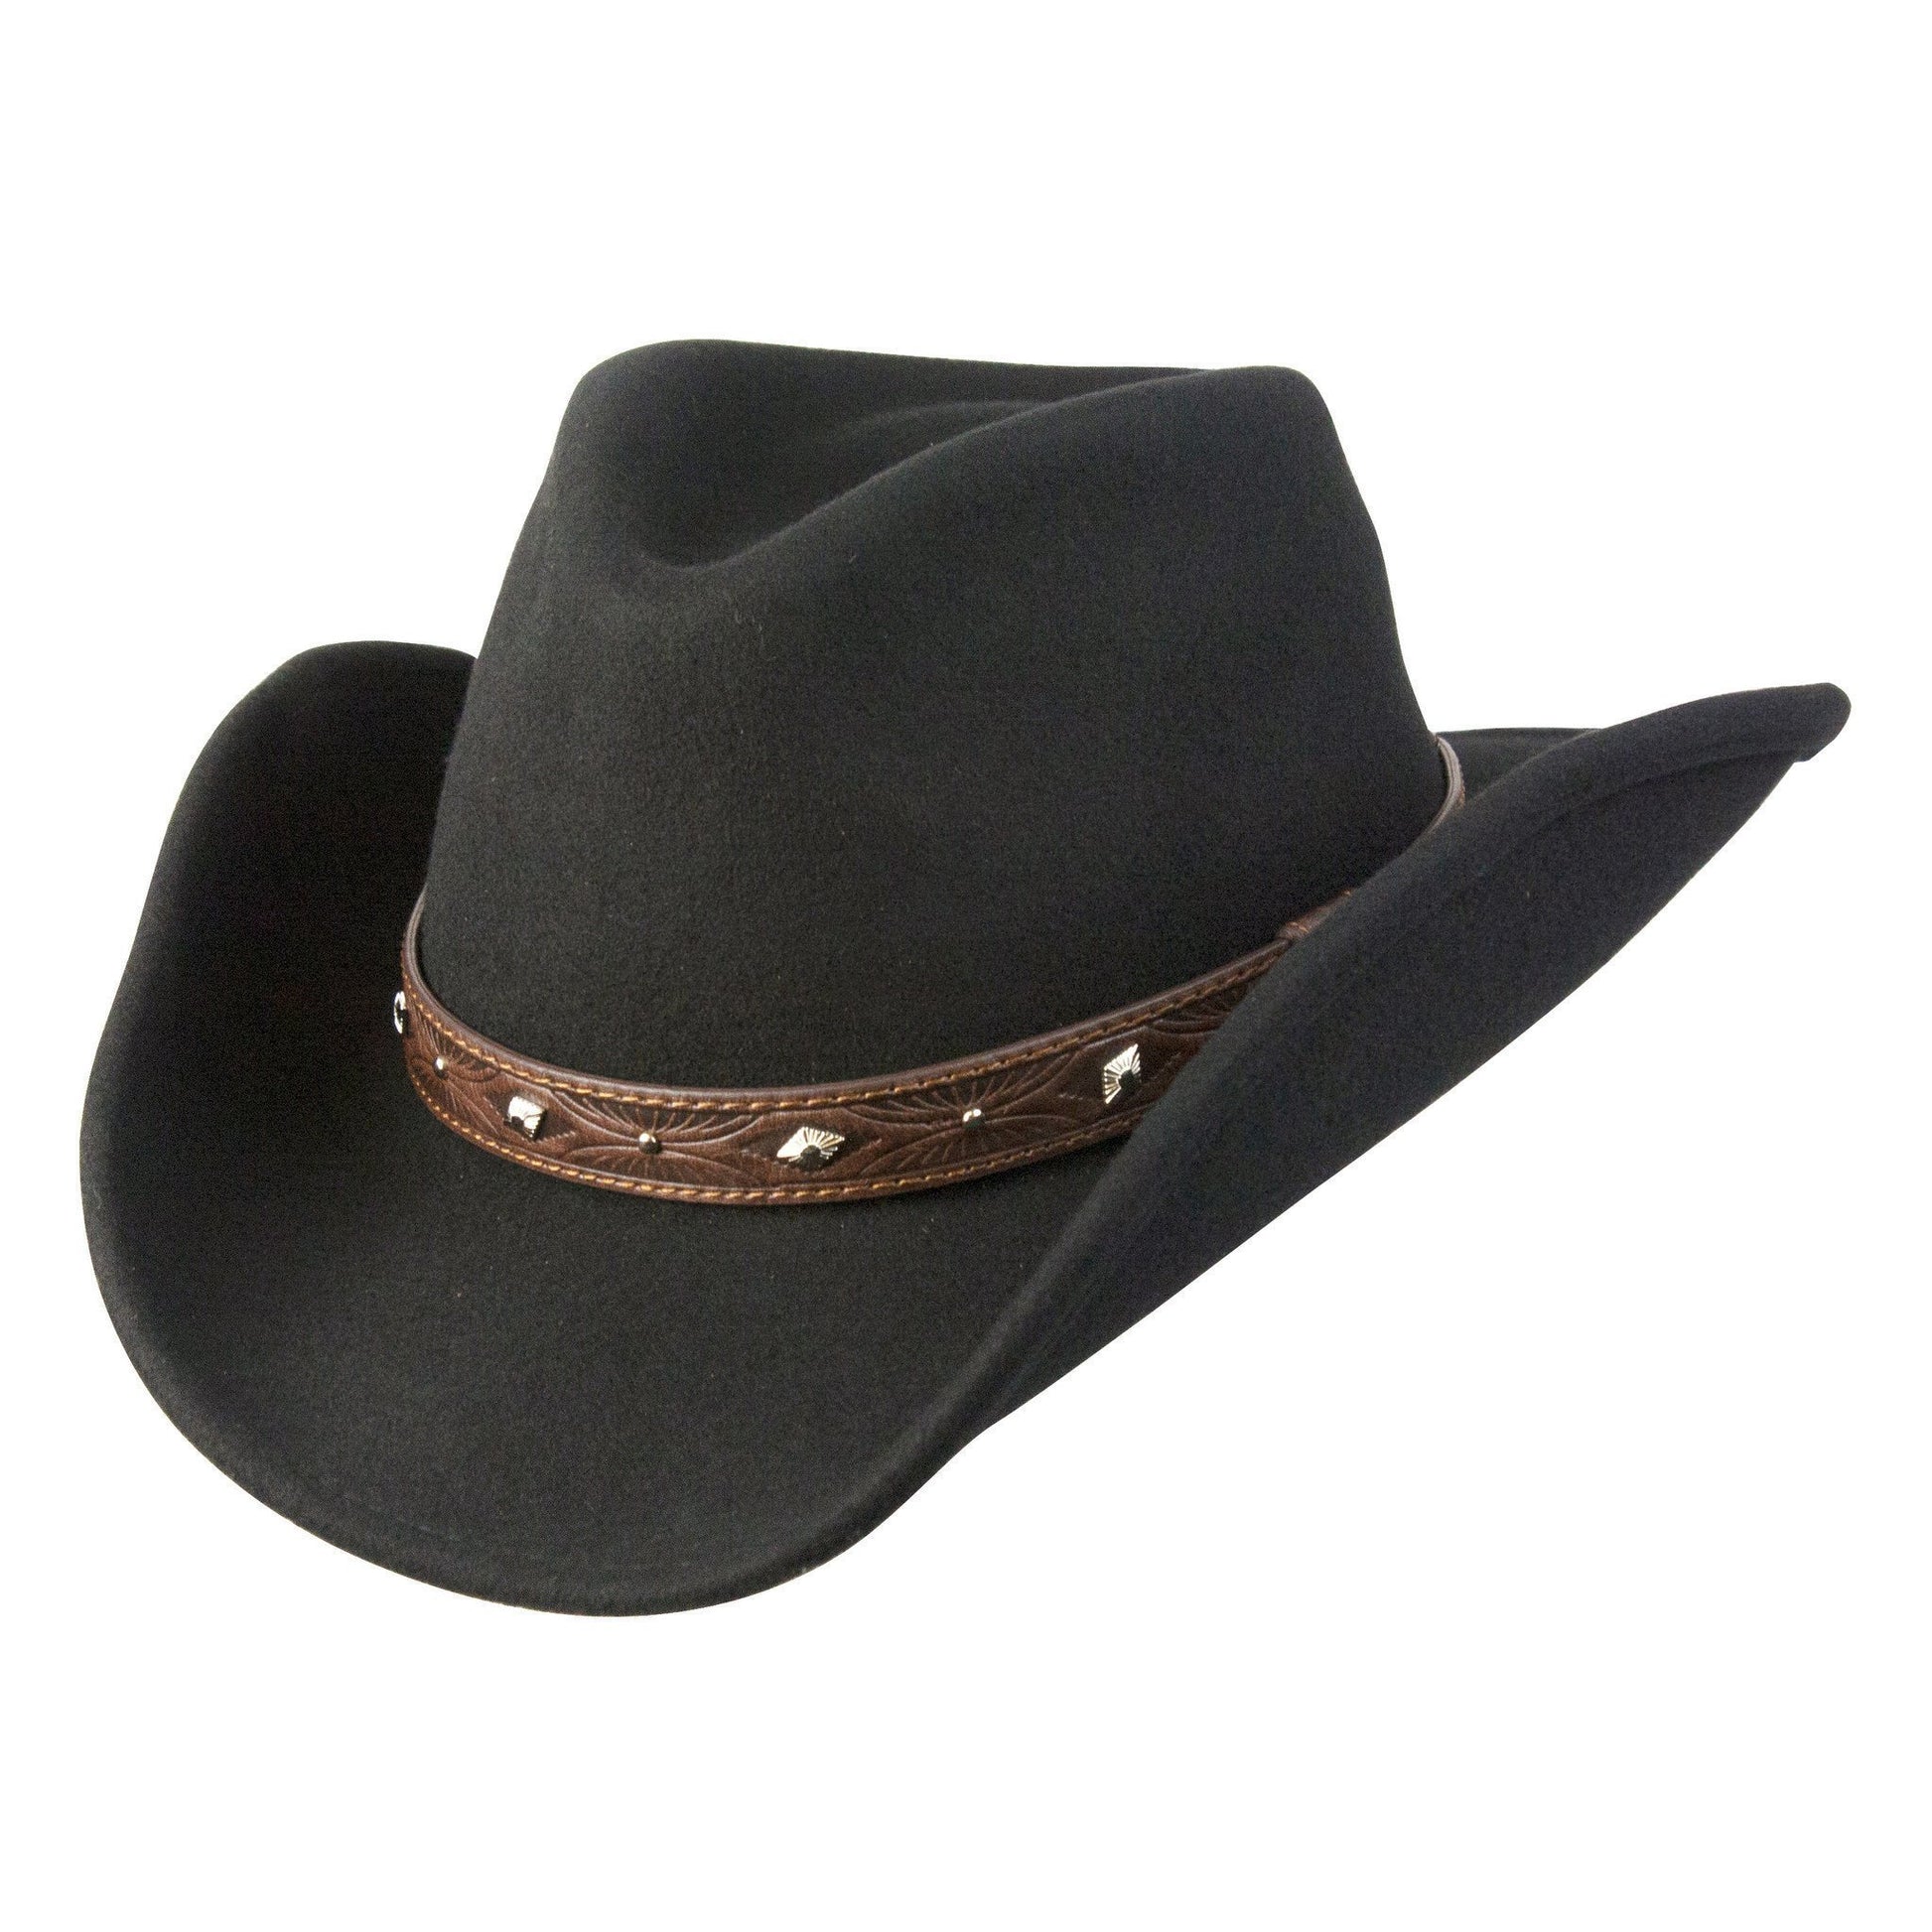 Yellowstone western wool hat hat in color Black featuring an embossed leather band with silver conchos